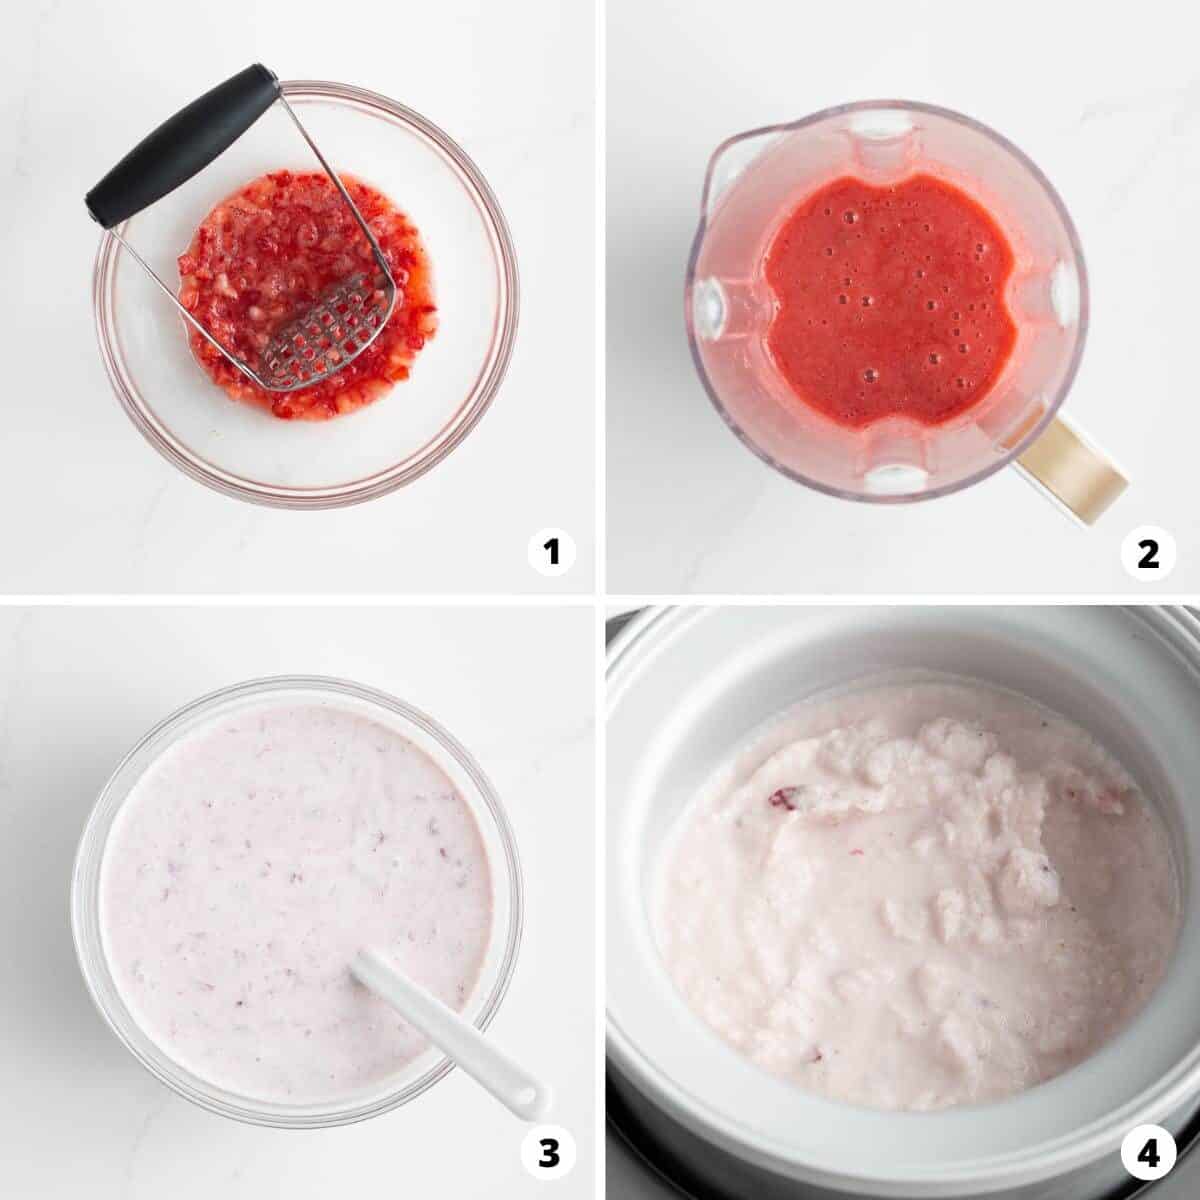 Showing how to make strawberry ice cream in a 4 step collage.